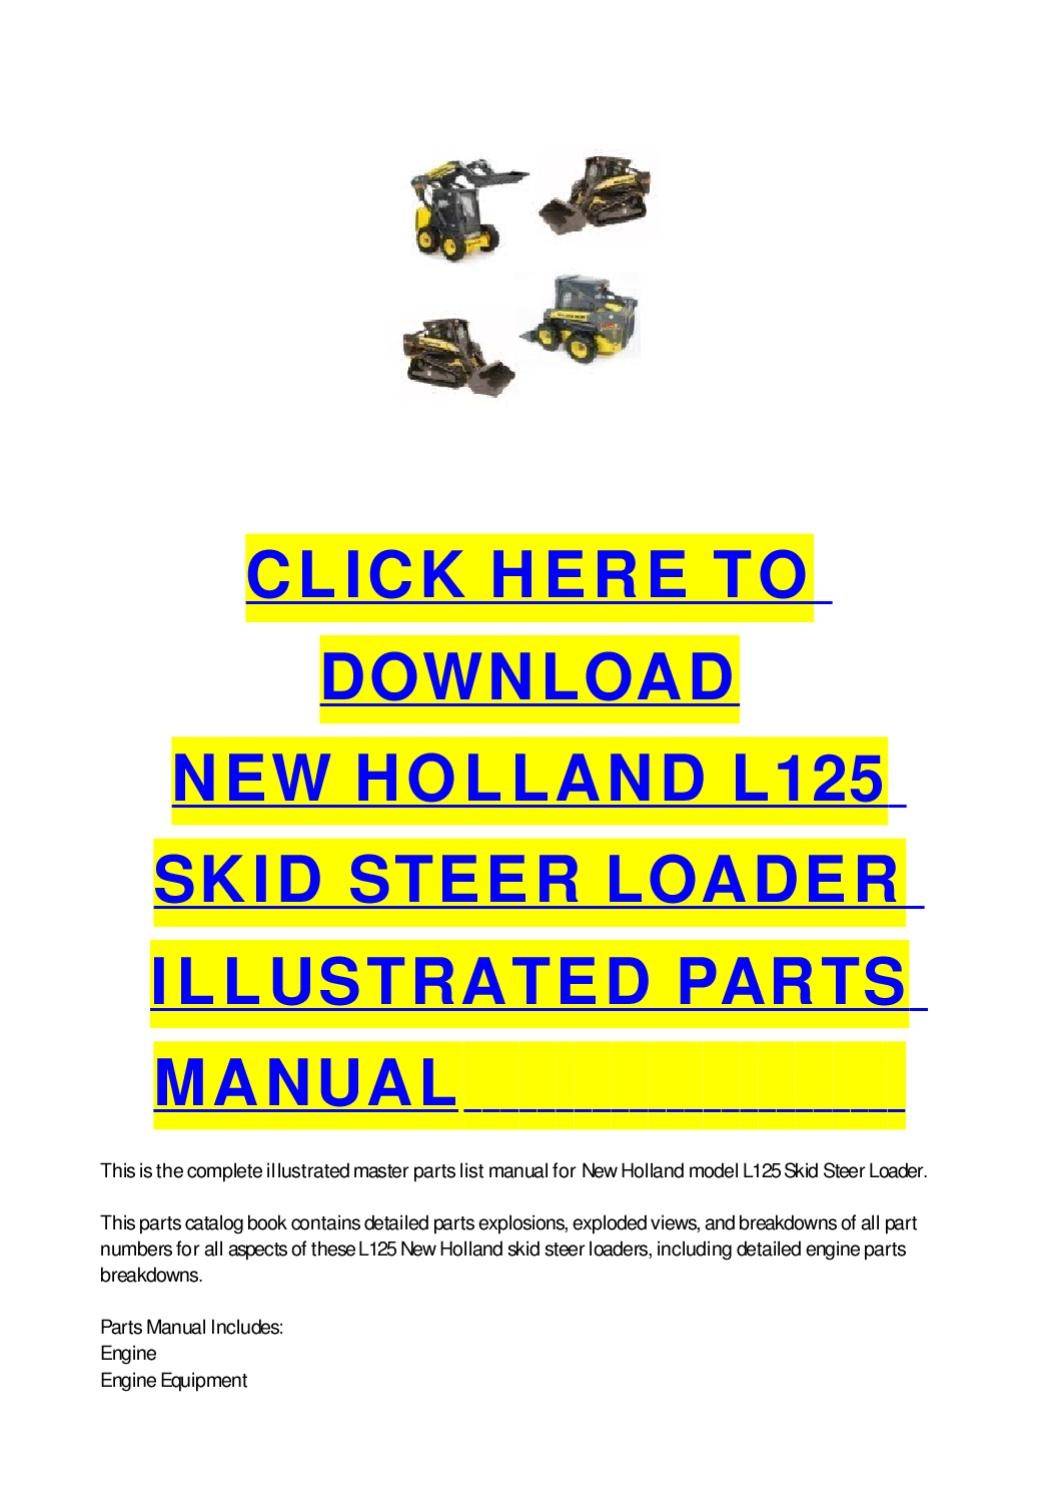 New Holland Skid Steer Parts Diagram New Holland L125 Skid Steer Loader Illustrated Parts Manual Cycle